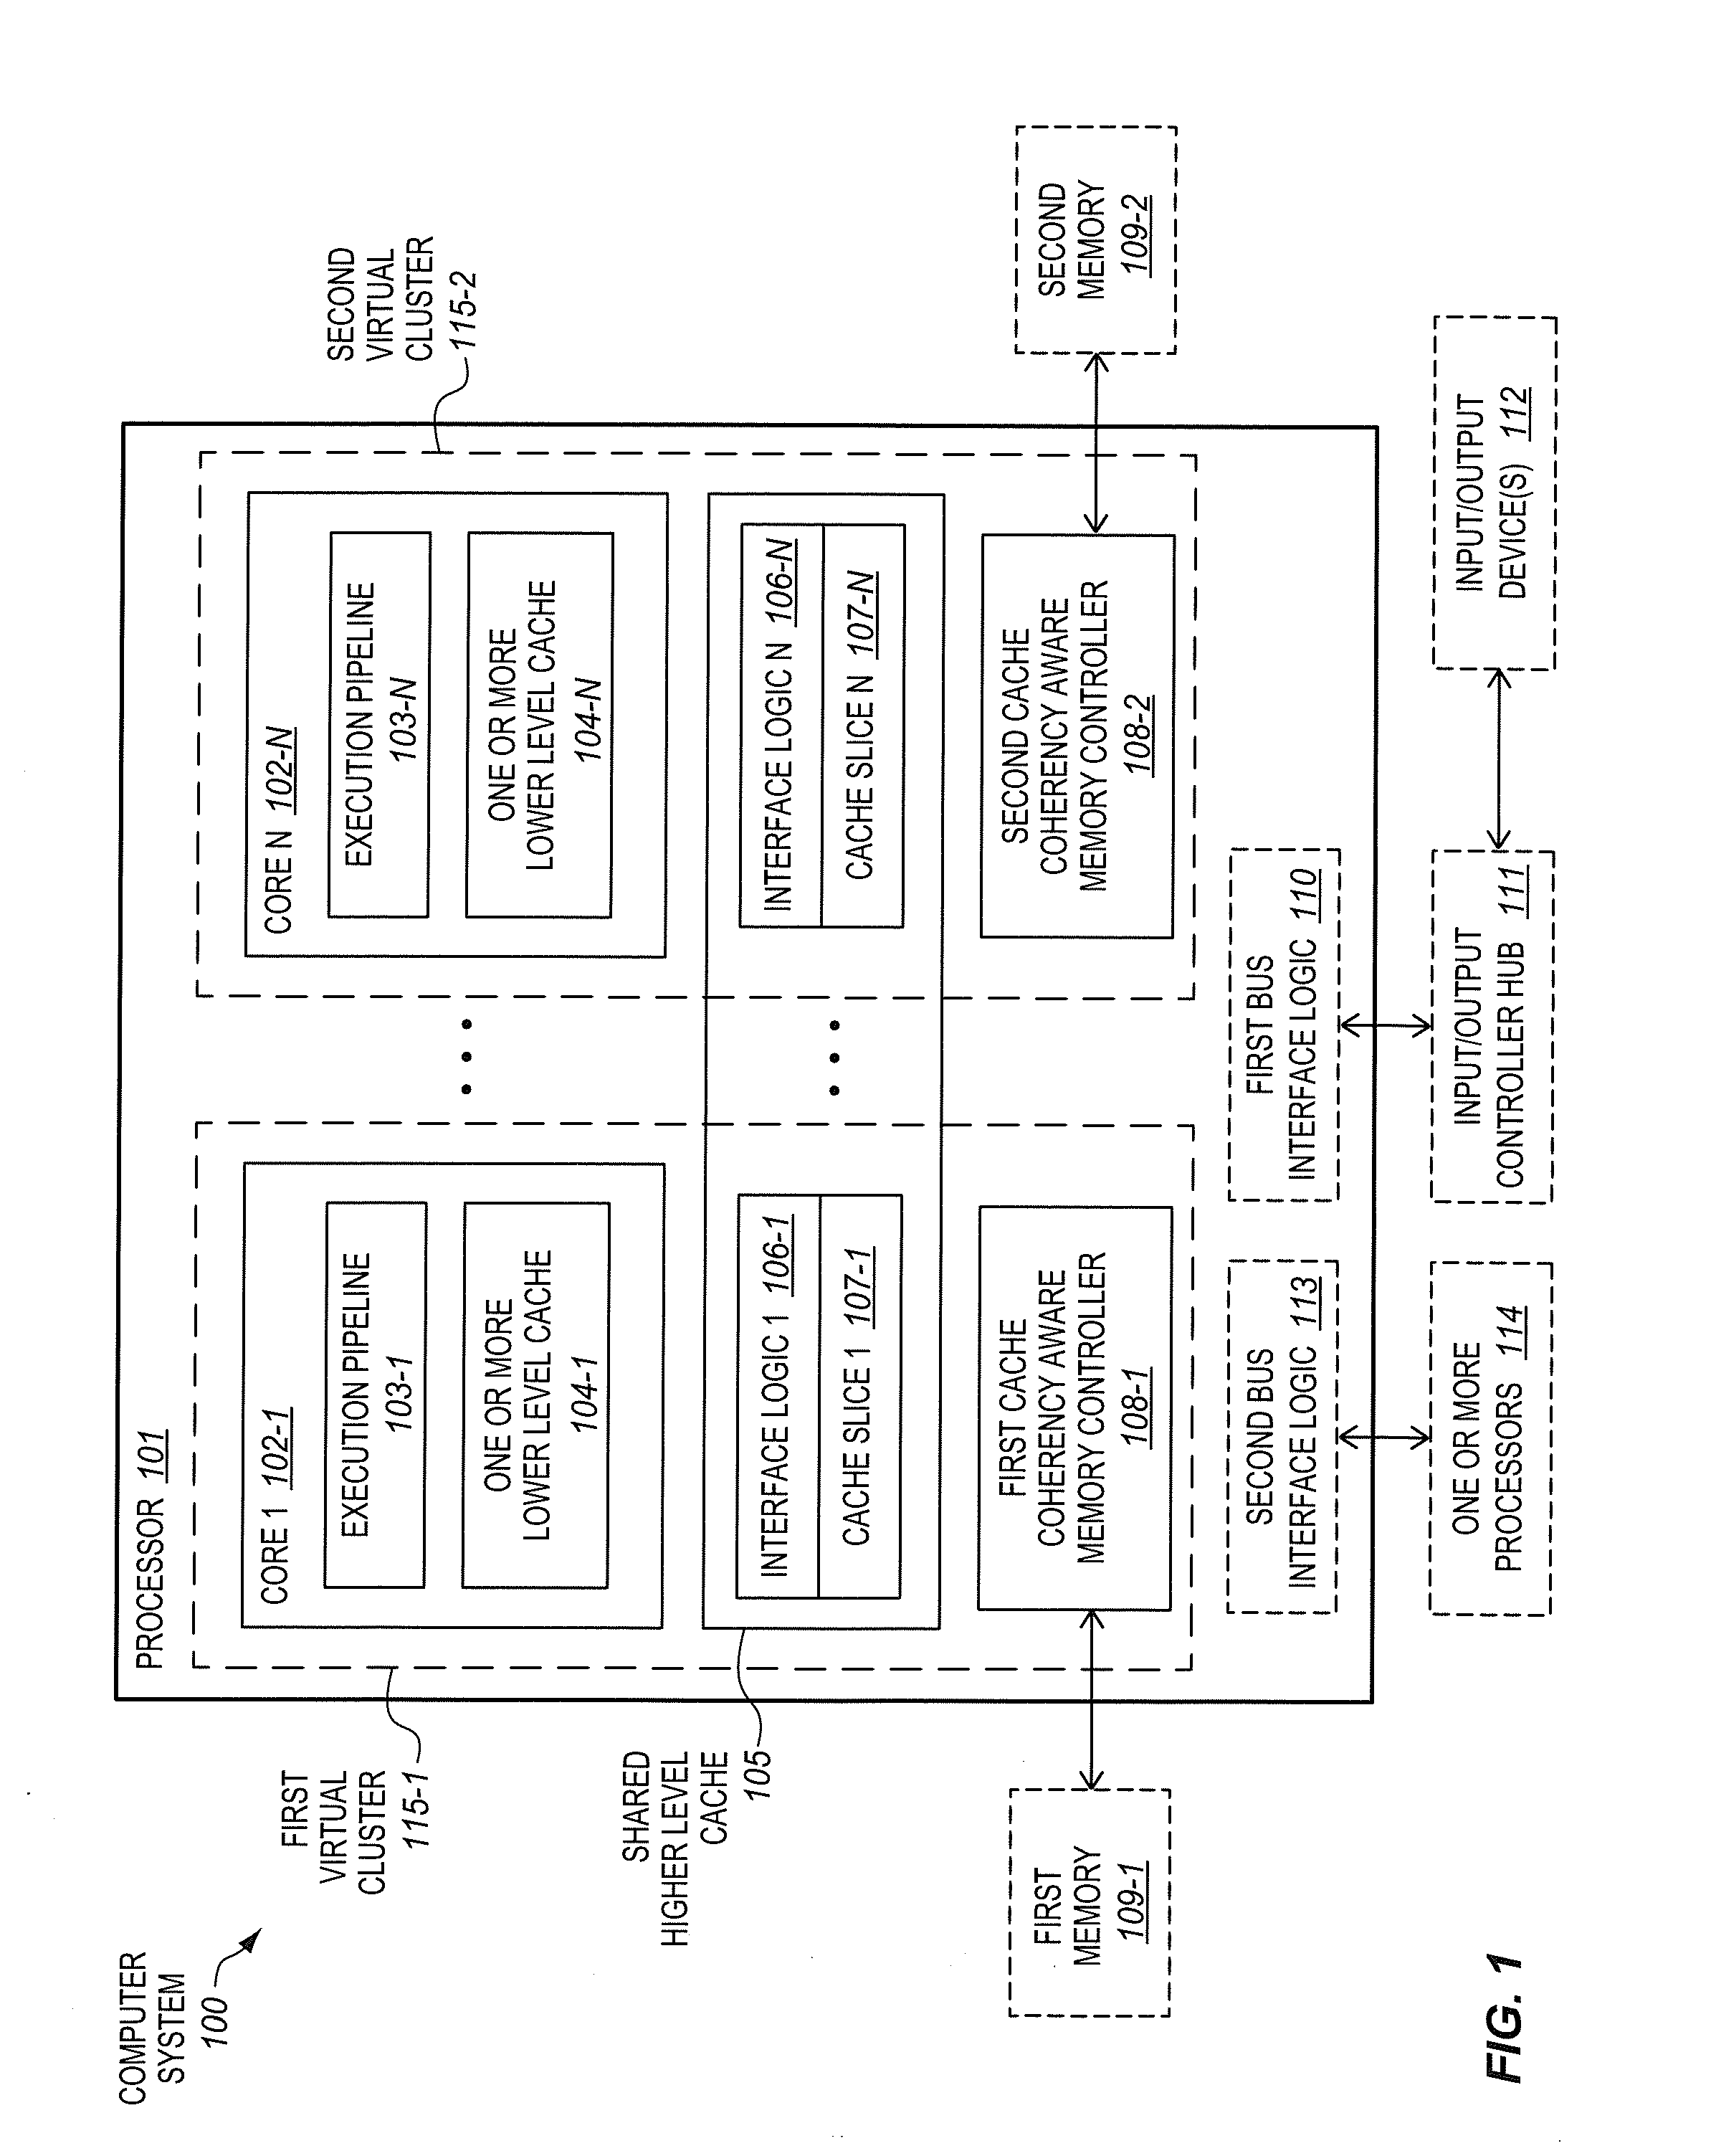 Processors having virtually clustered cores and cache slices